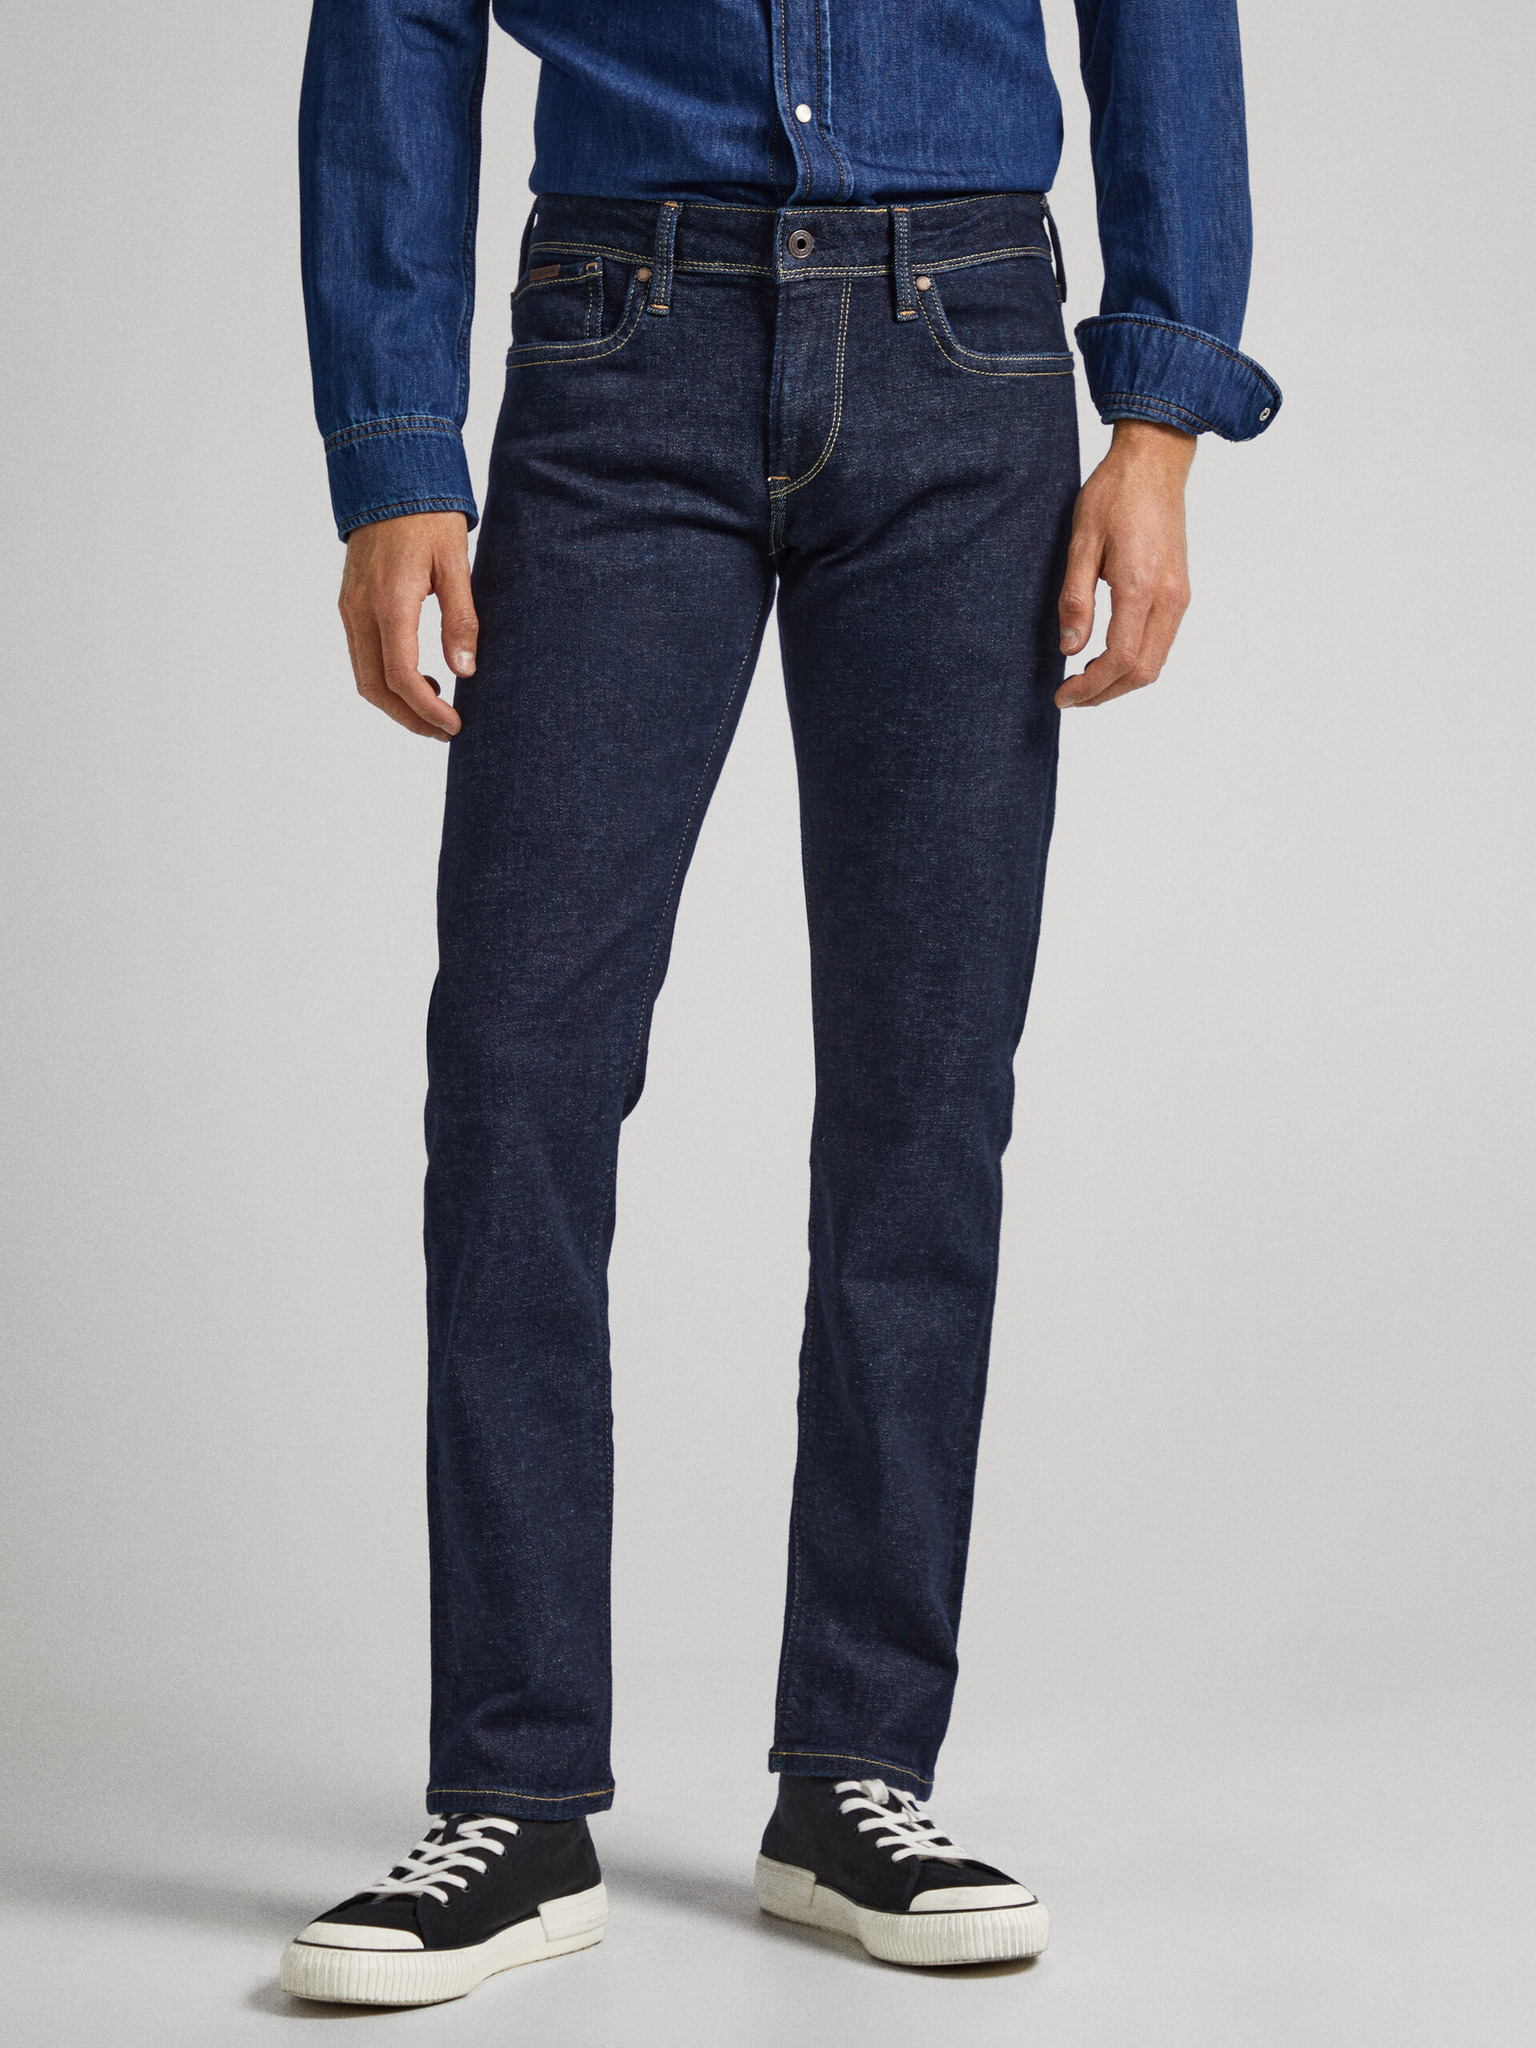 Pepe Jeans - Hatch Jeans